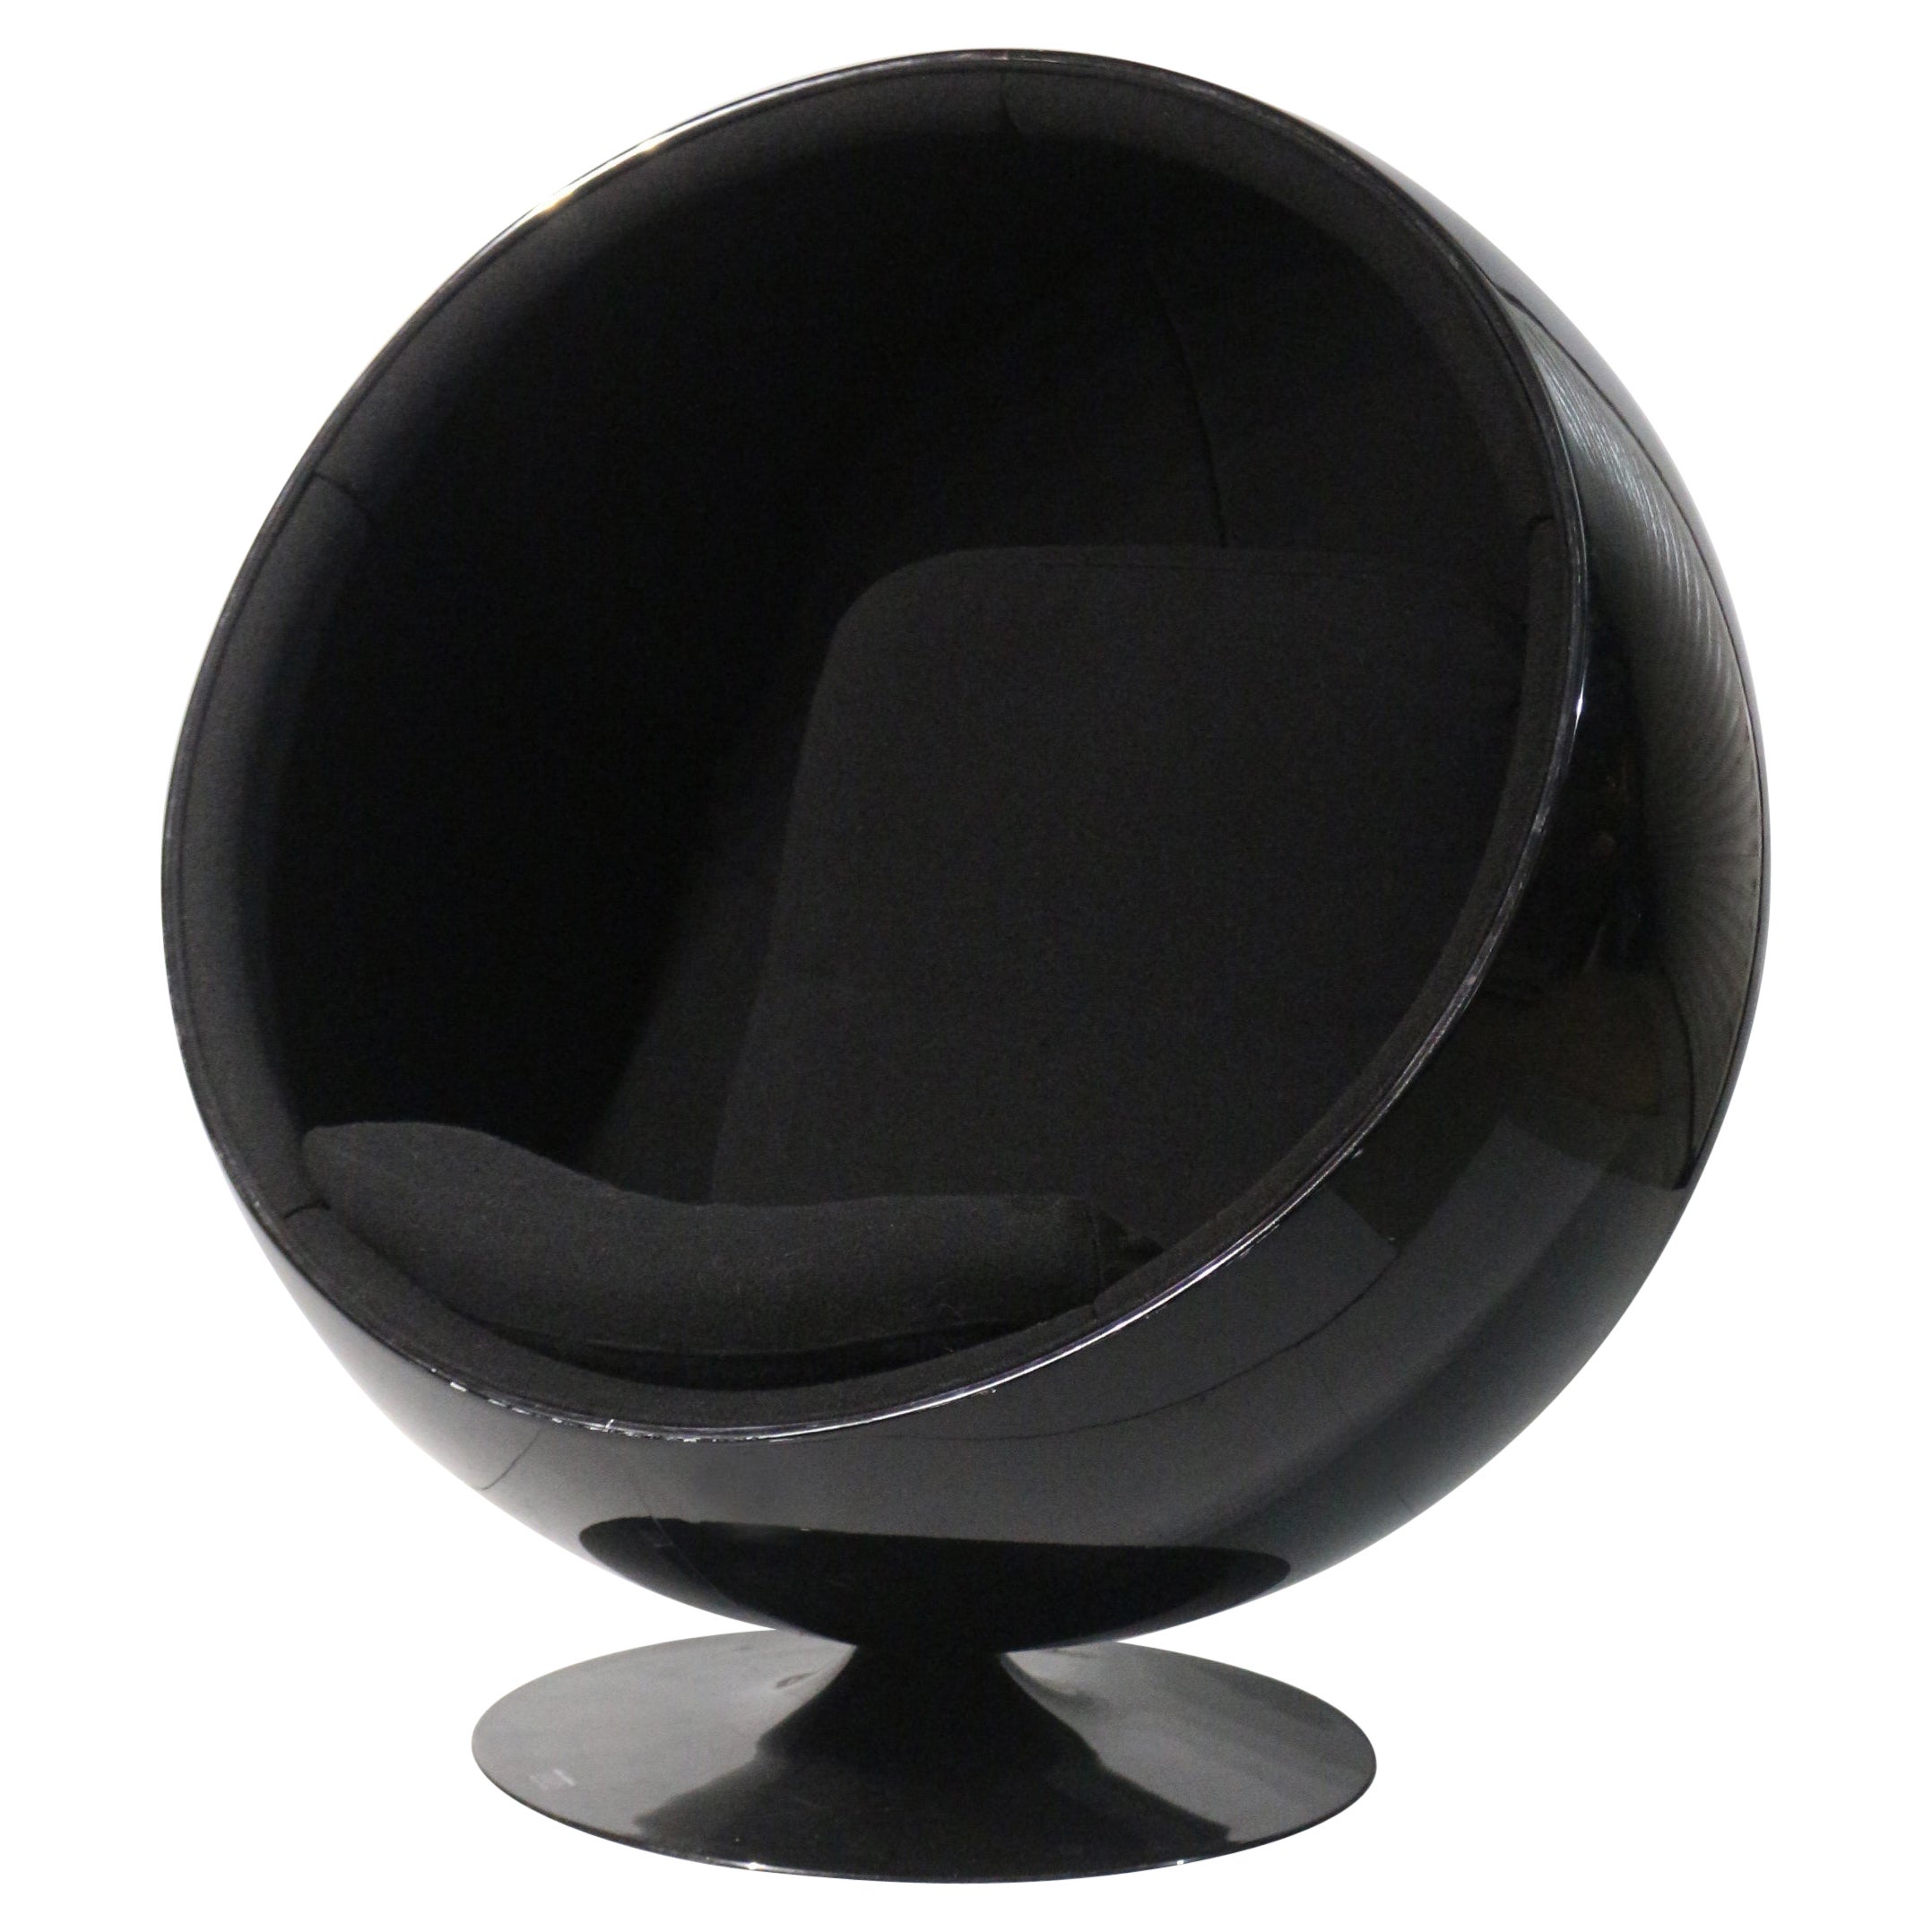 Authentic ball chair by Ero Aarnio 1980